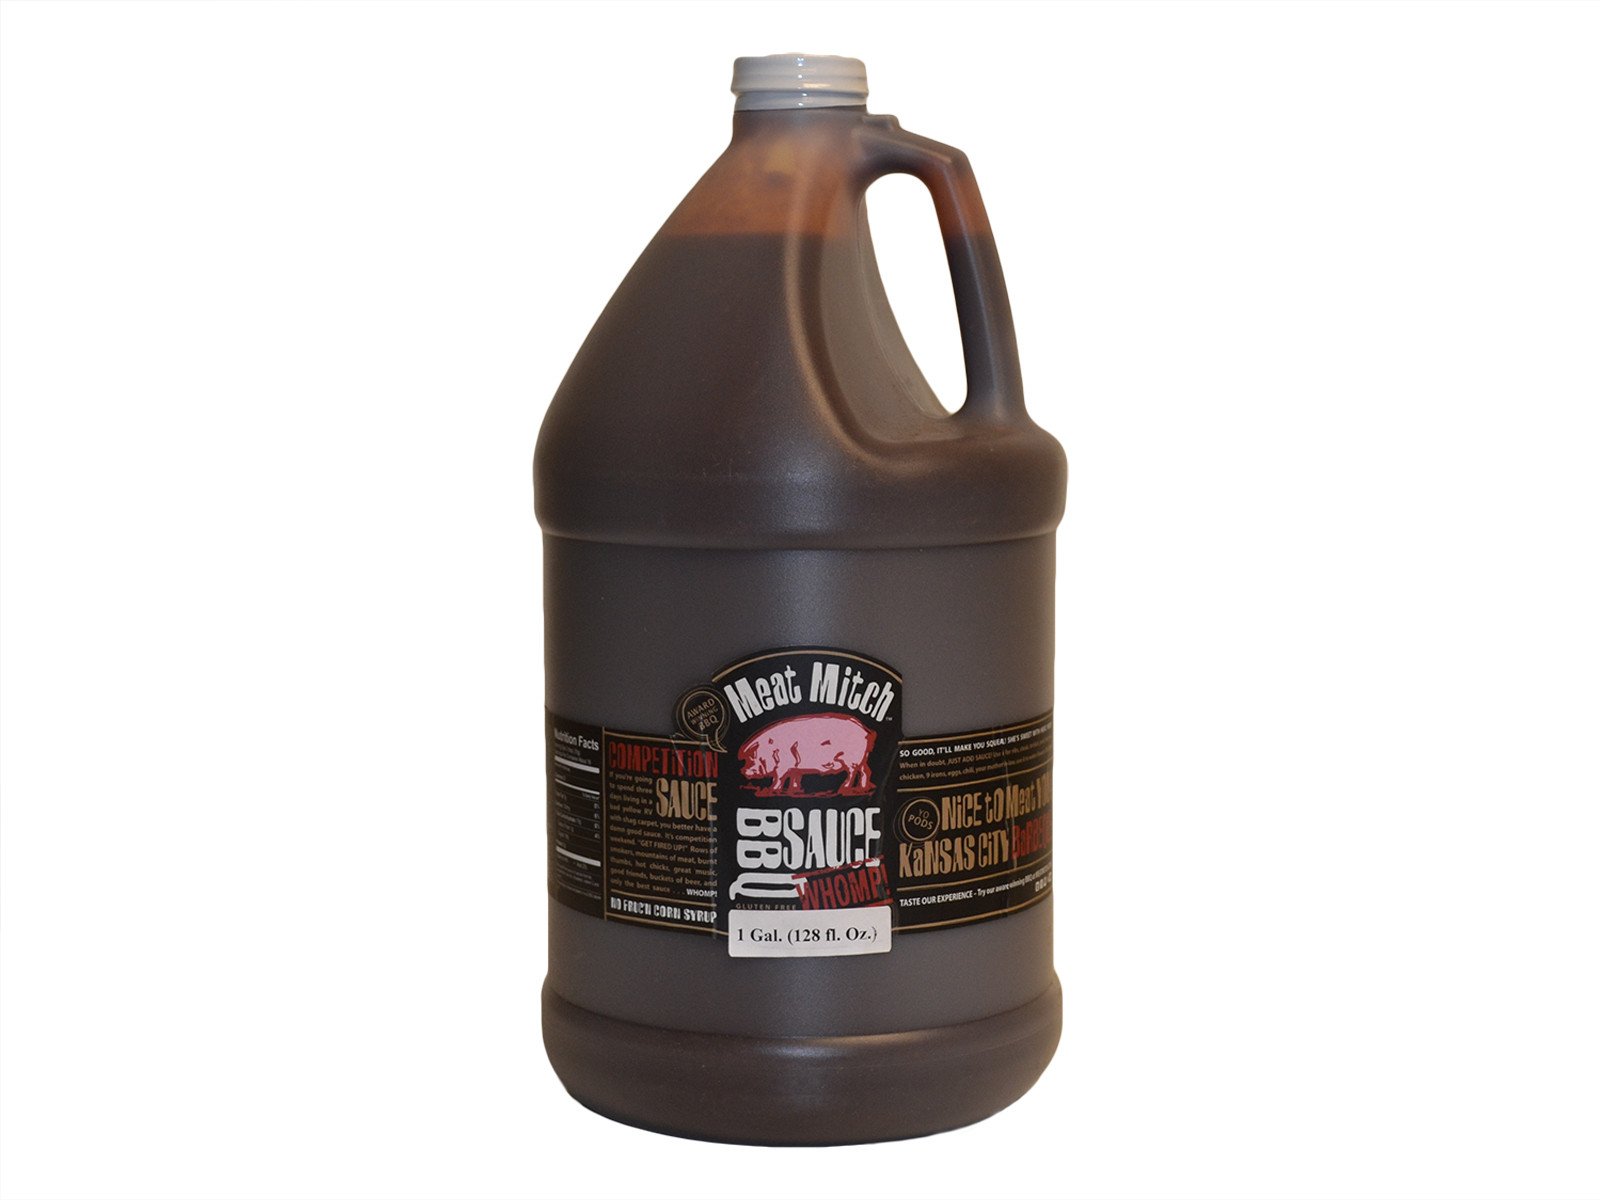 Meat Mitch: Whomp Naked BBQ Sauce - GrillBillies Barbecue 